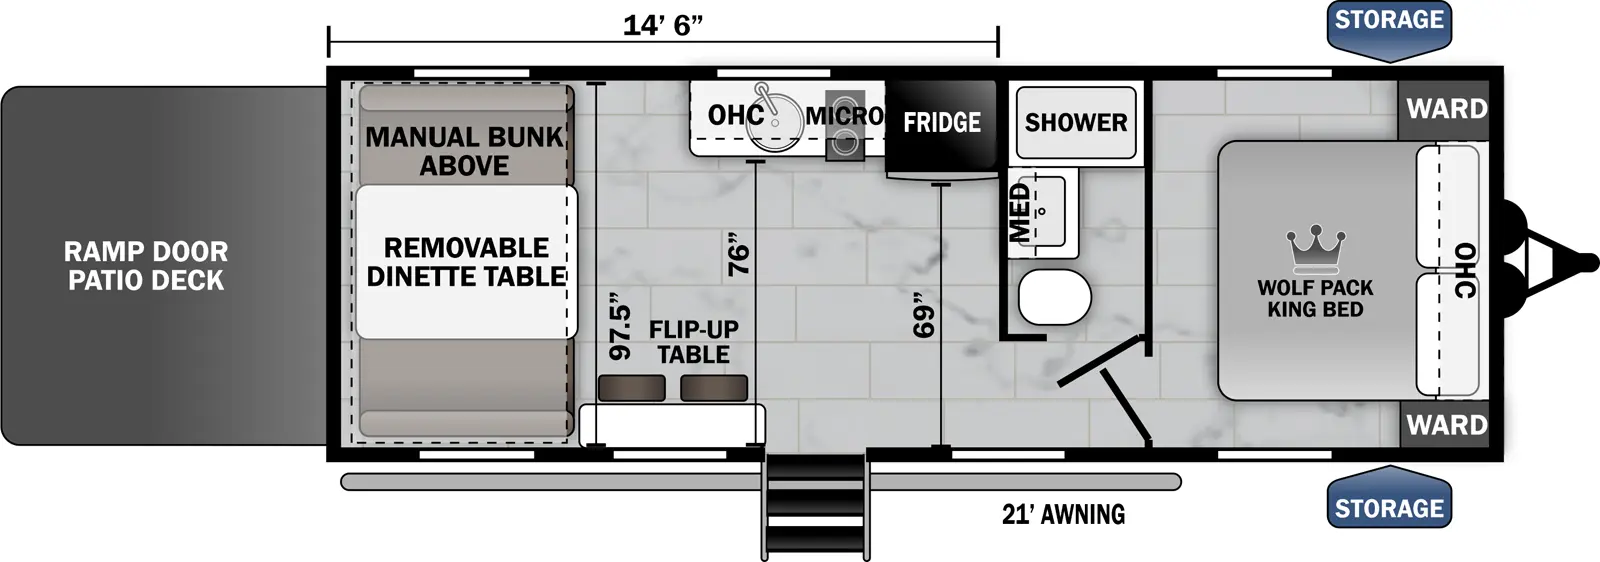 The 24-14.5 has zero slideouts, one entry, and a rear ramp door. Exterior features storage and a 21 foot awning. Interior layout front to back: foot-facing king bed with overhead cabinet and wardrobes on each side; off-door side full bathroom with medicine cabinet; door side entry and flip-up table with seats; off-door side refrigerator, and kitchen counter with sink, cooktop, overhead cabinet, and microwave; rear removable dinette table with manual bunk above. Garage dimensions: 14 foot 6 inches from rear to bathroom wall; 97.5 inches from door side to off-door side; 76 inches from door side to kitchen counter; 69 inches from door side to refrigerator.